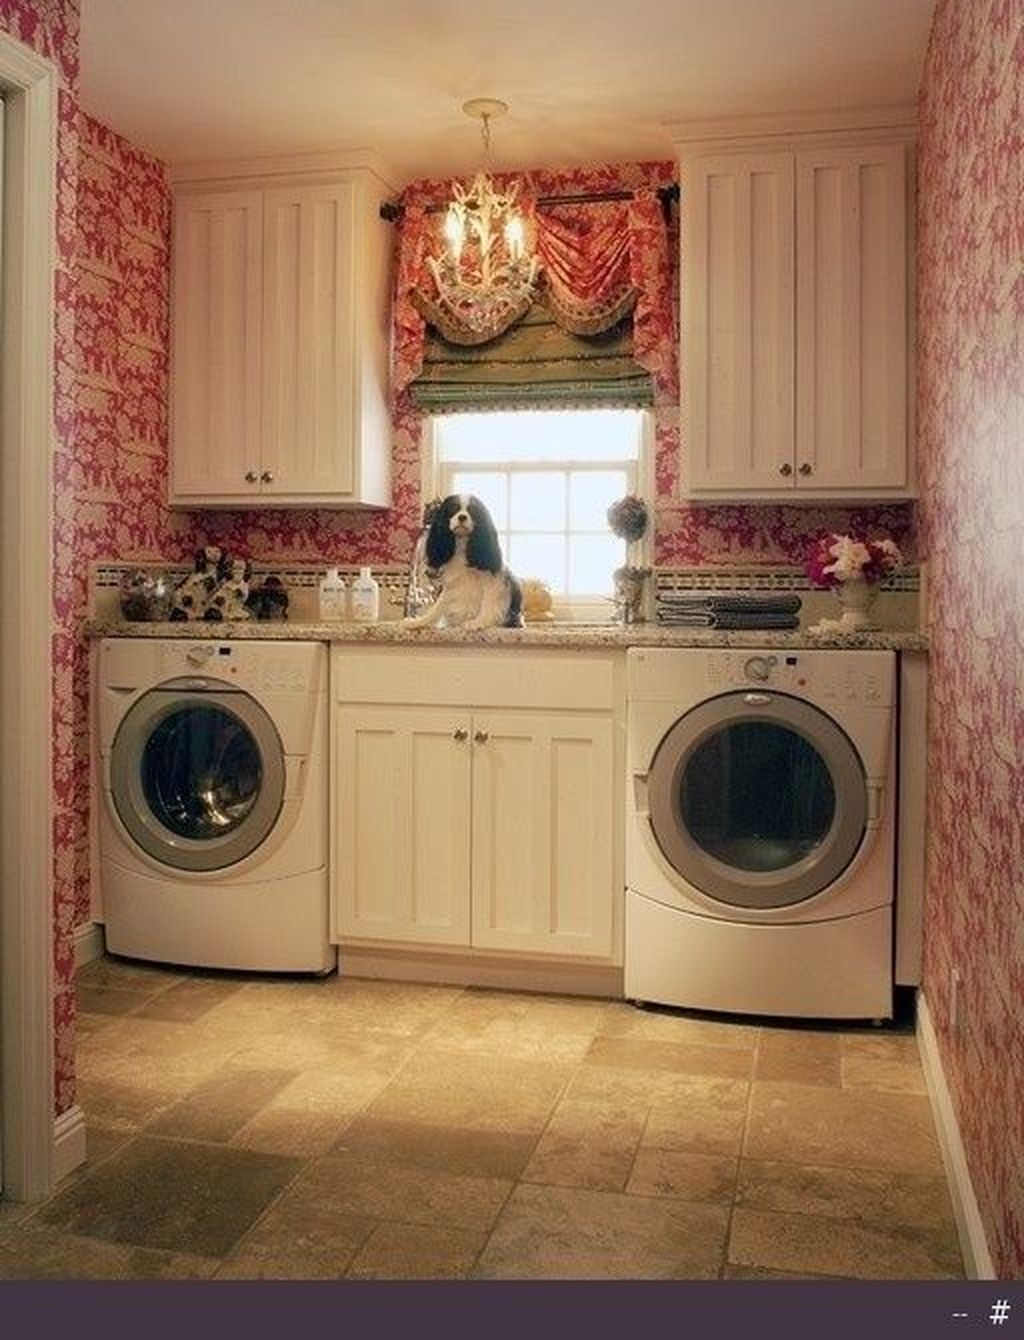 Inspiring Laundry Room Design With French Country Style 29